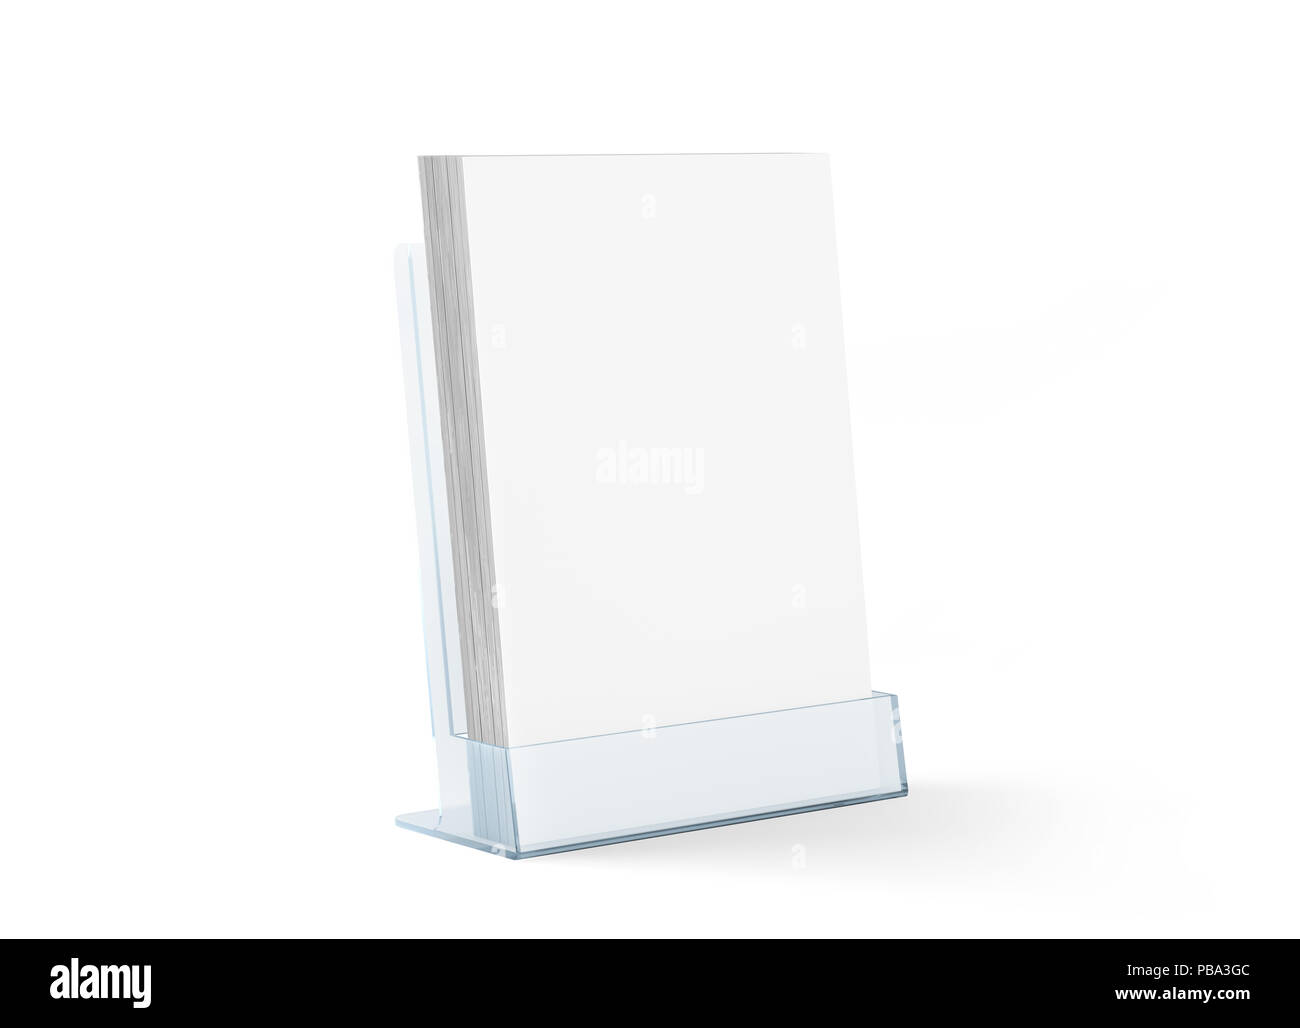 Download Blank Flyer Mockup Glass Plastic Transparent Holder Isolated 3d Rendering Plain Flier Stand In Plexiglass Tray Clear Brochure Holding In Acrylic Po Stock Photo Alamy